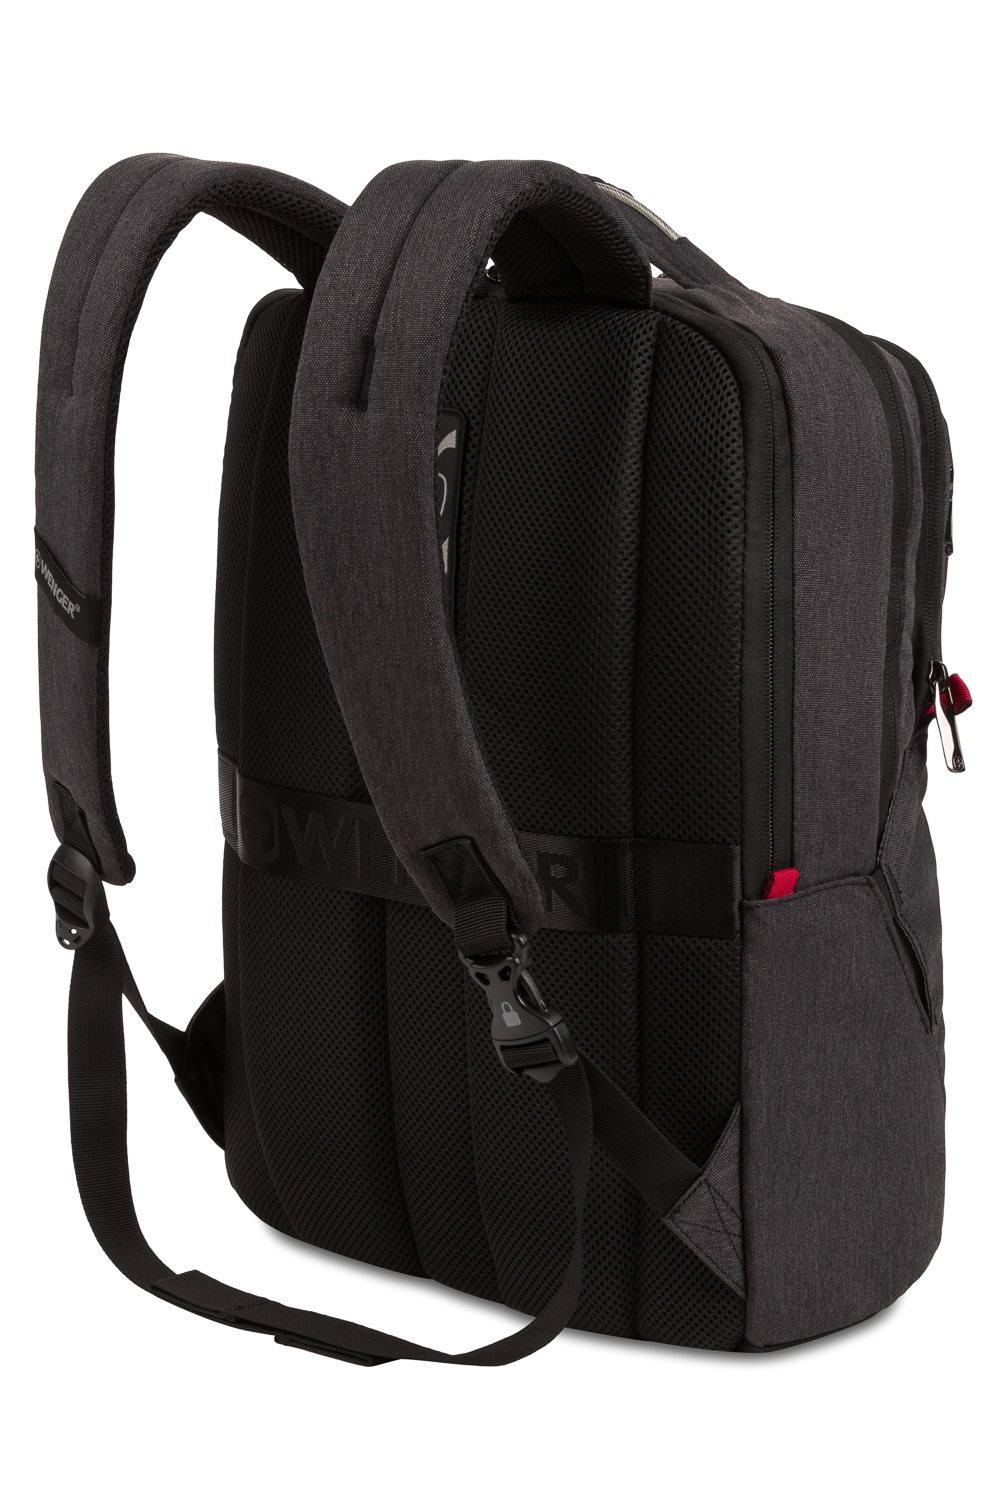 The Bag Co Professional Laptop Backpack-Sunrise Trading Co.